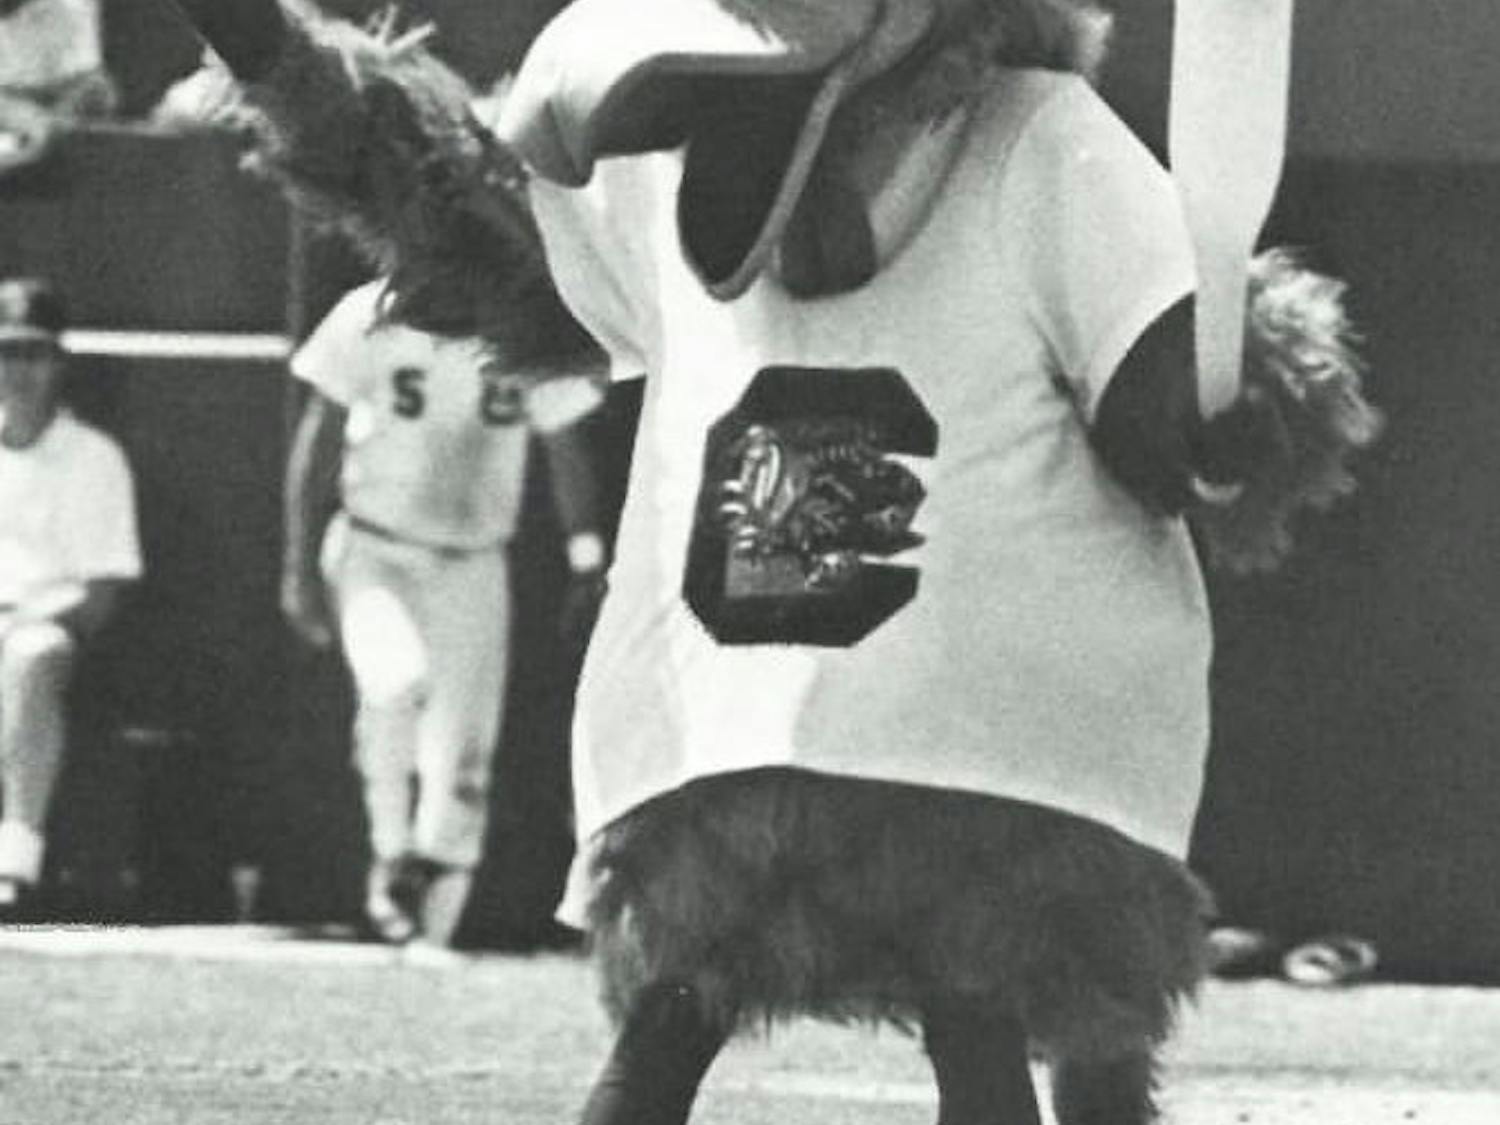 Cocky on the baseball field in the 1980s holding a toy baseball bat. He took on a goofy personality that kept the crowd entertained.&nbsp;